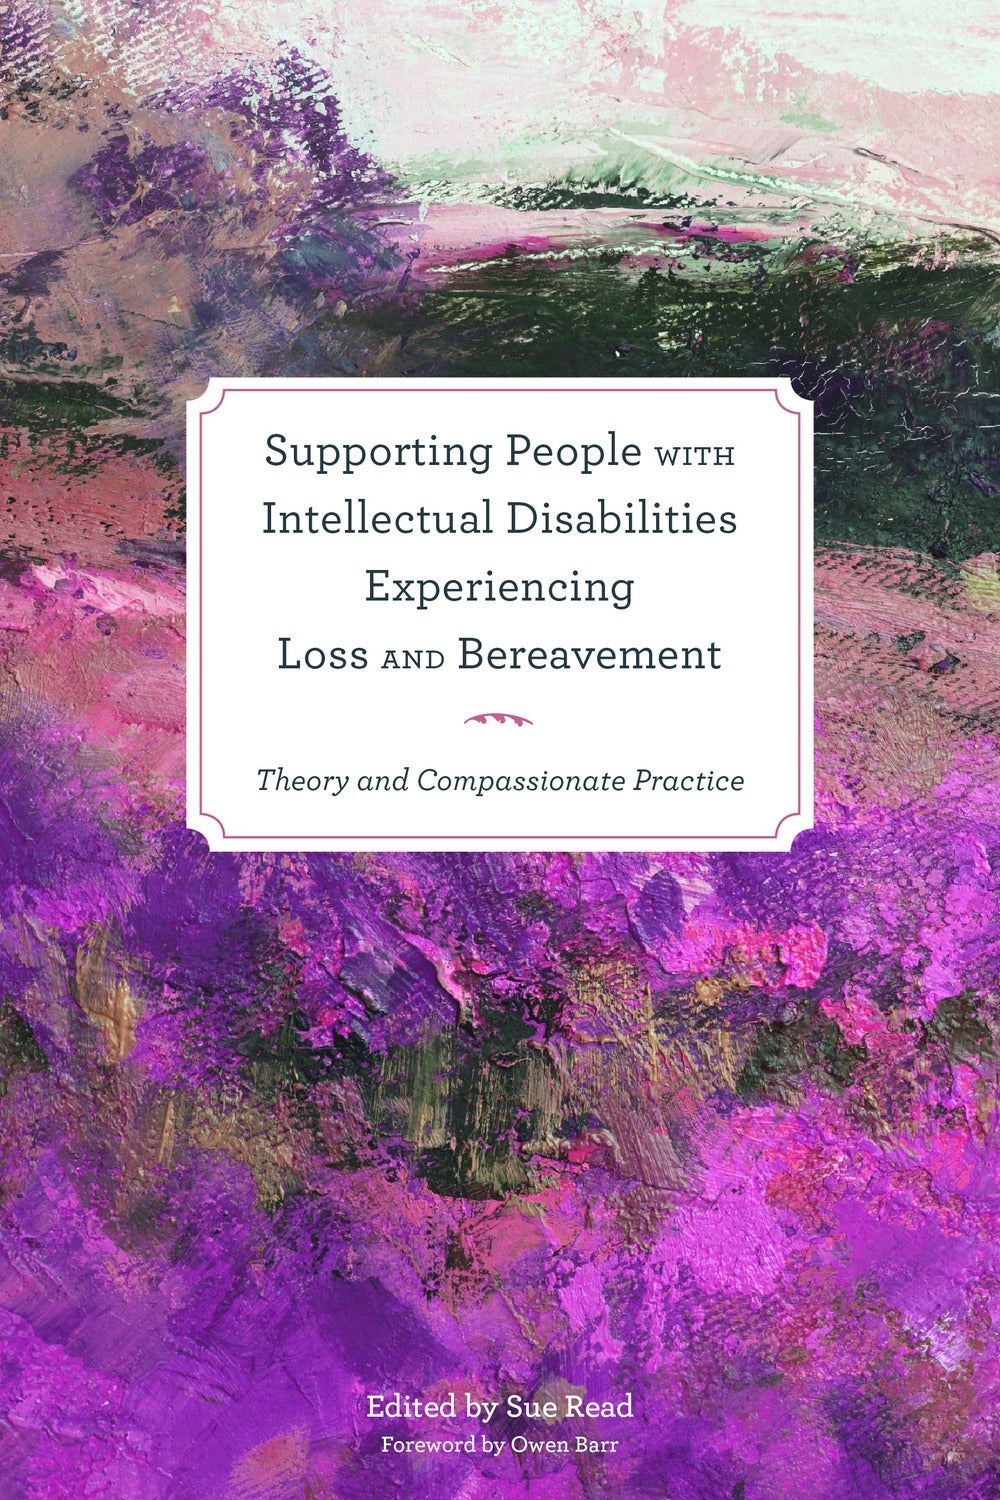 Supporting People with Intellectual Disabilities Experiencing Loss and Bereavement by No Author Listed, Sue Read, Owen Barr